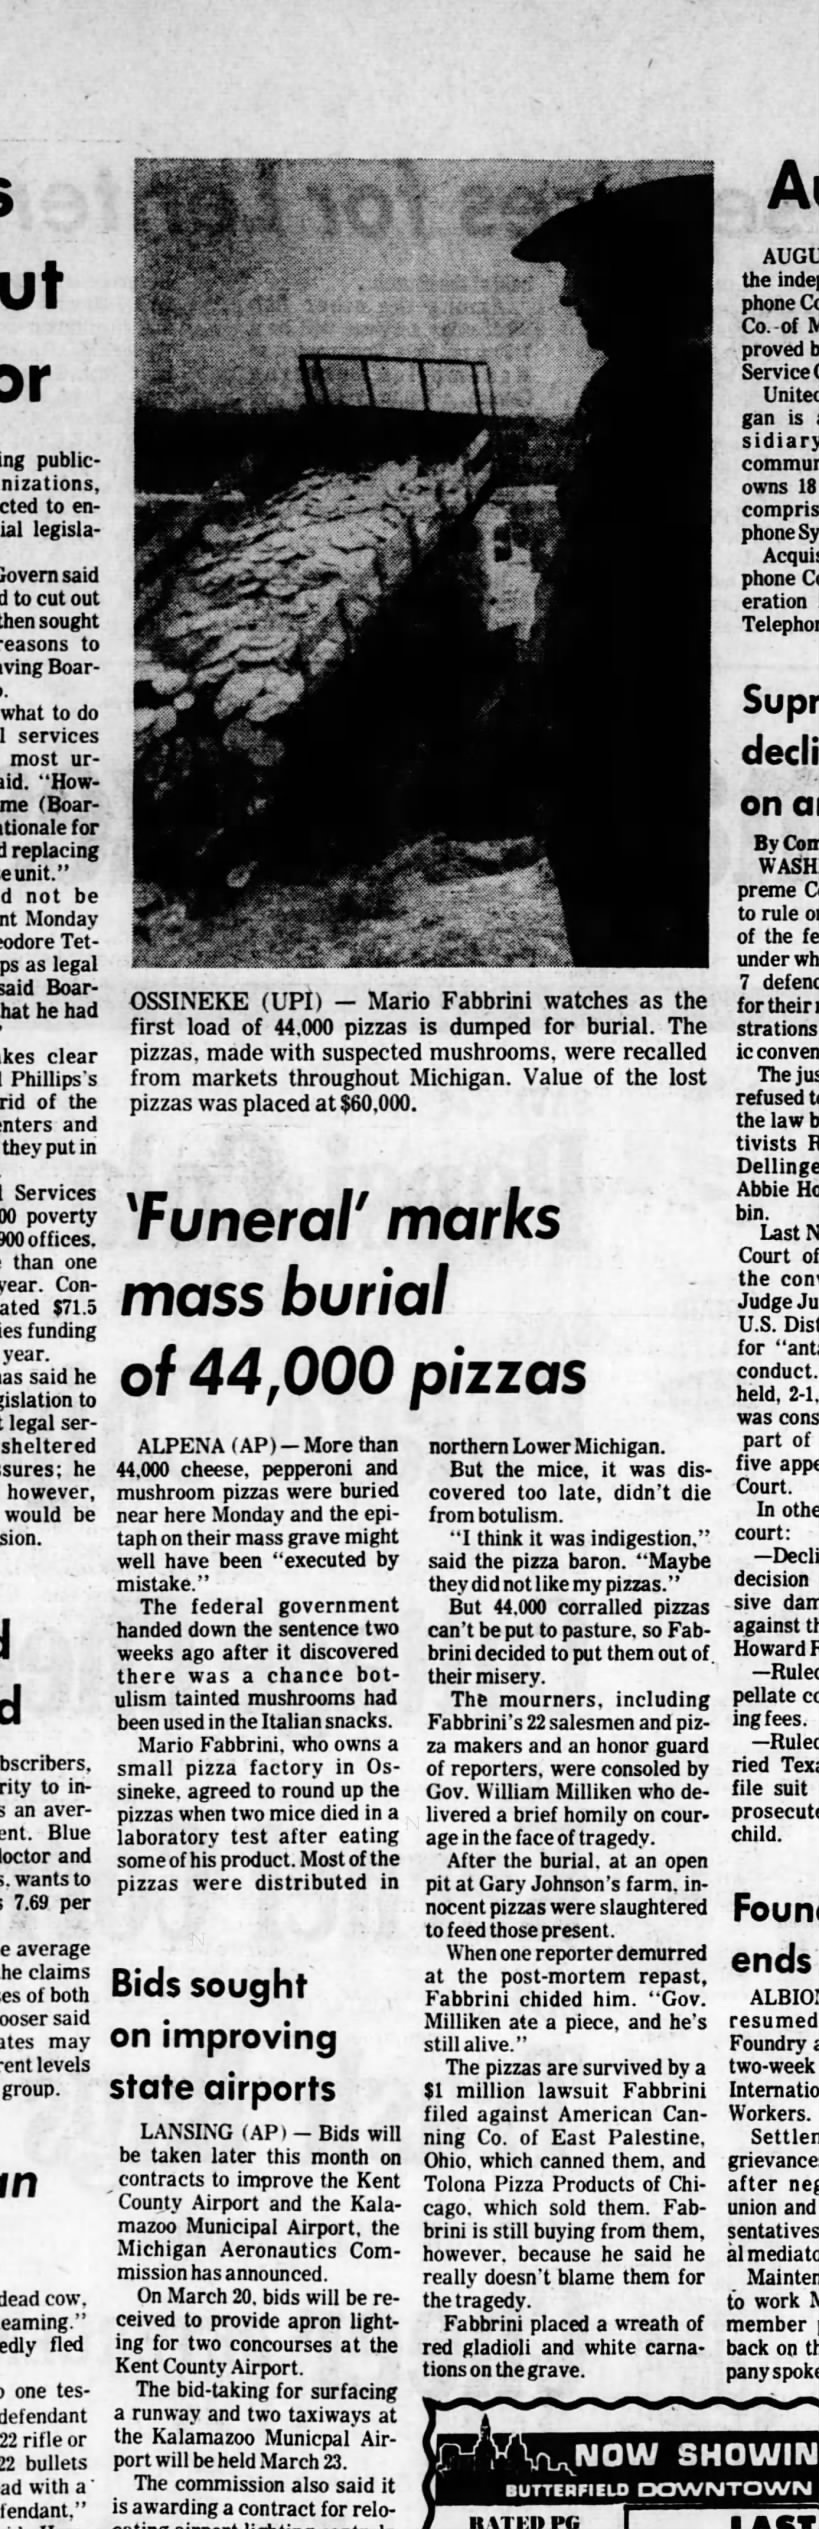 'Funeral' marks mass burial of 44,000 pizzas